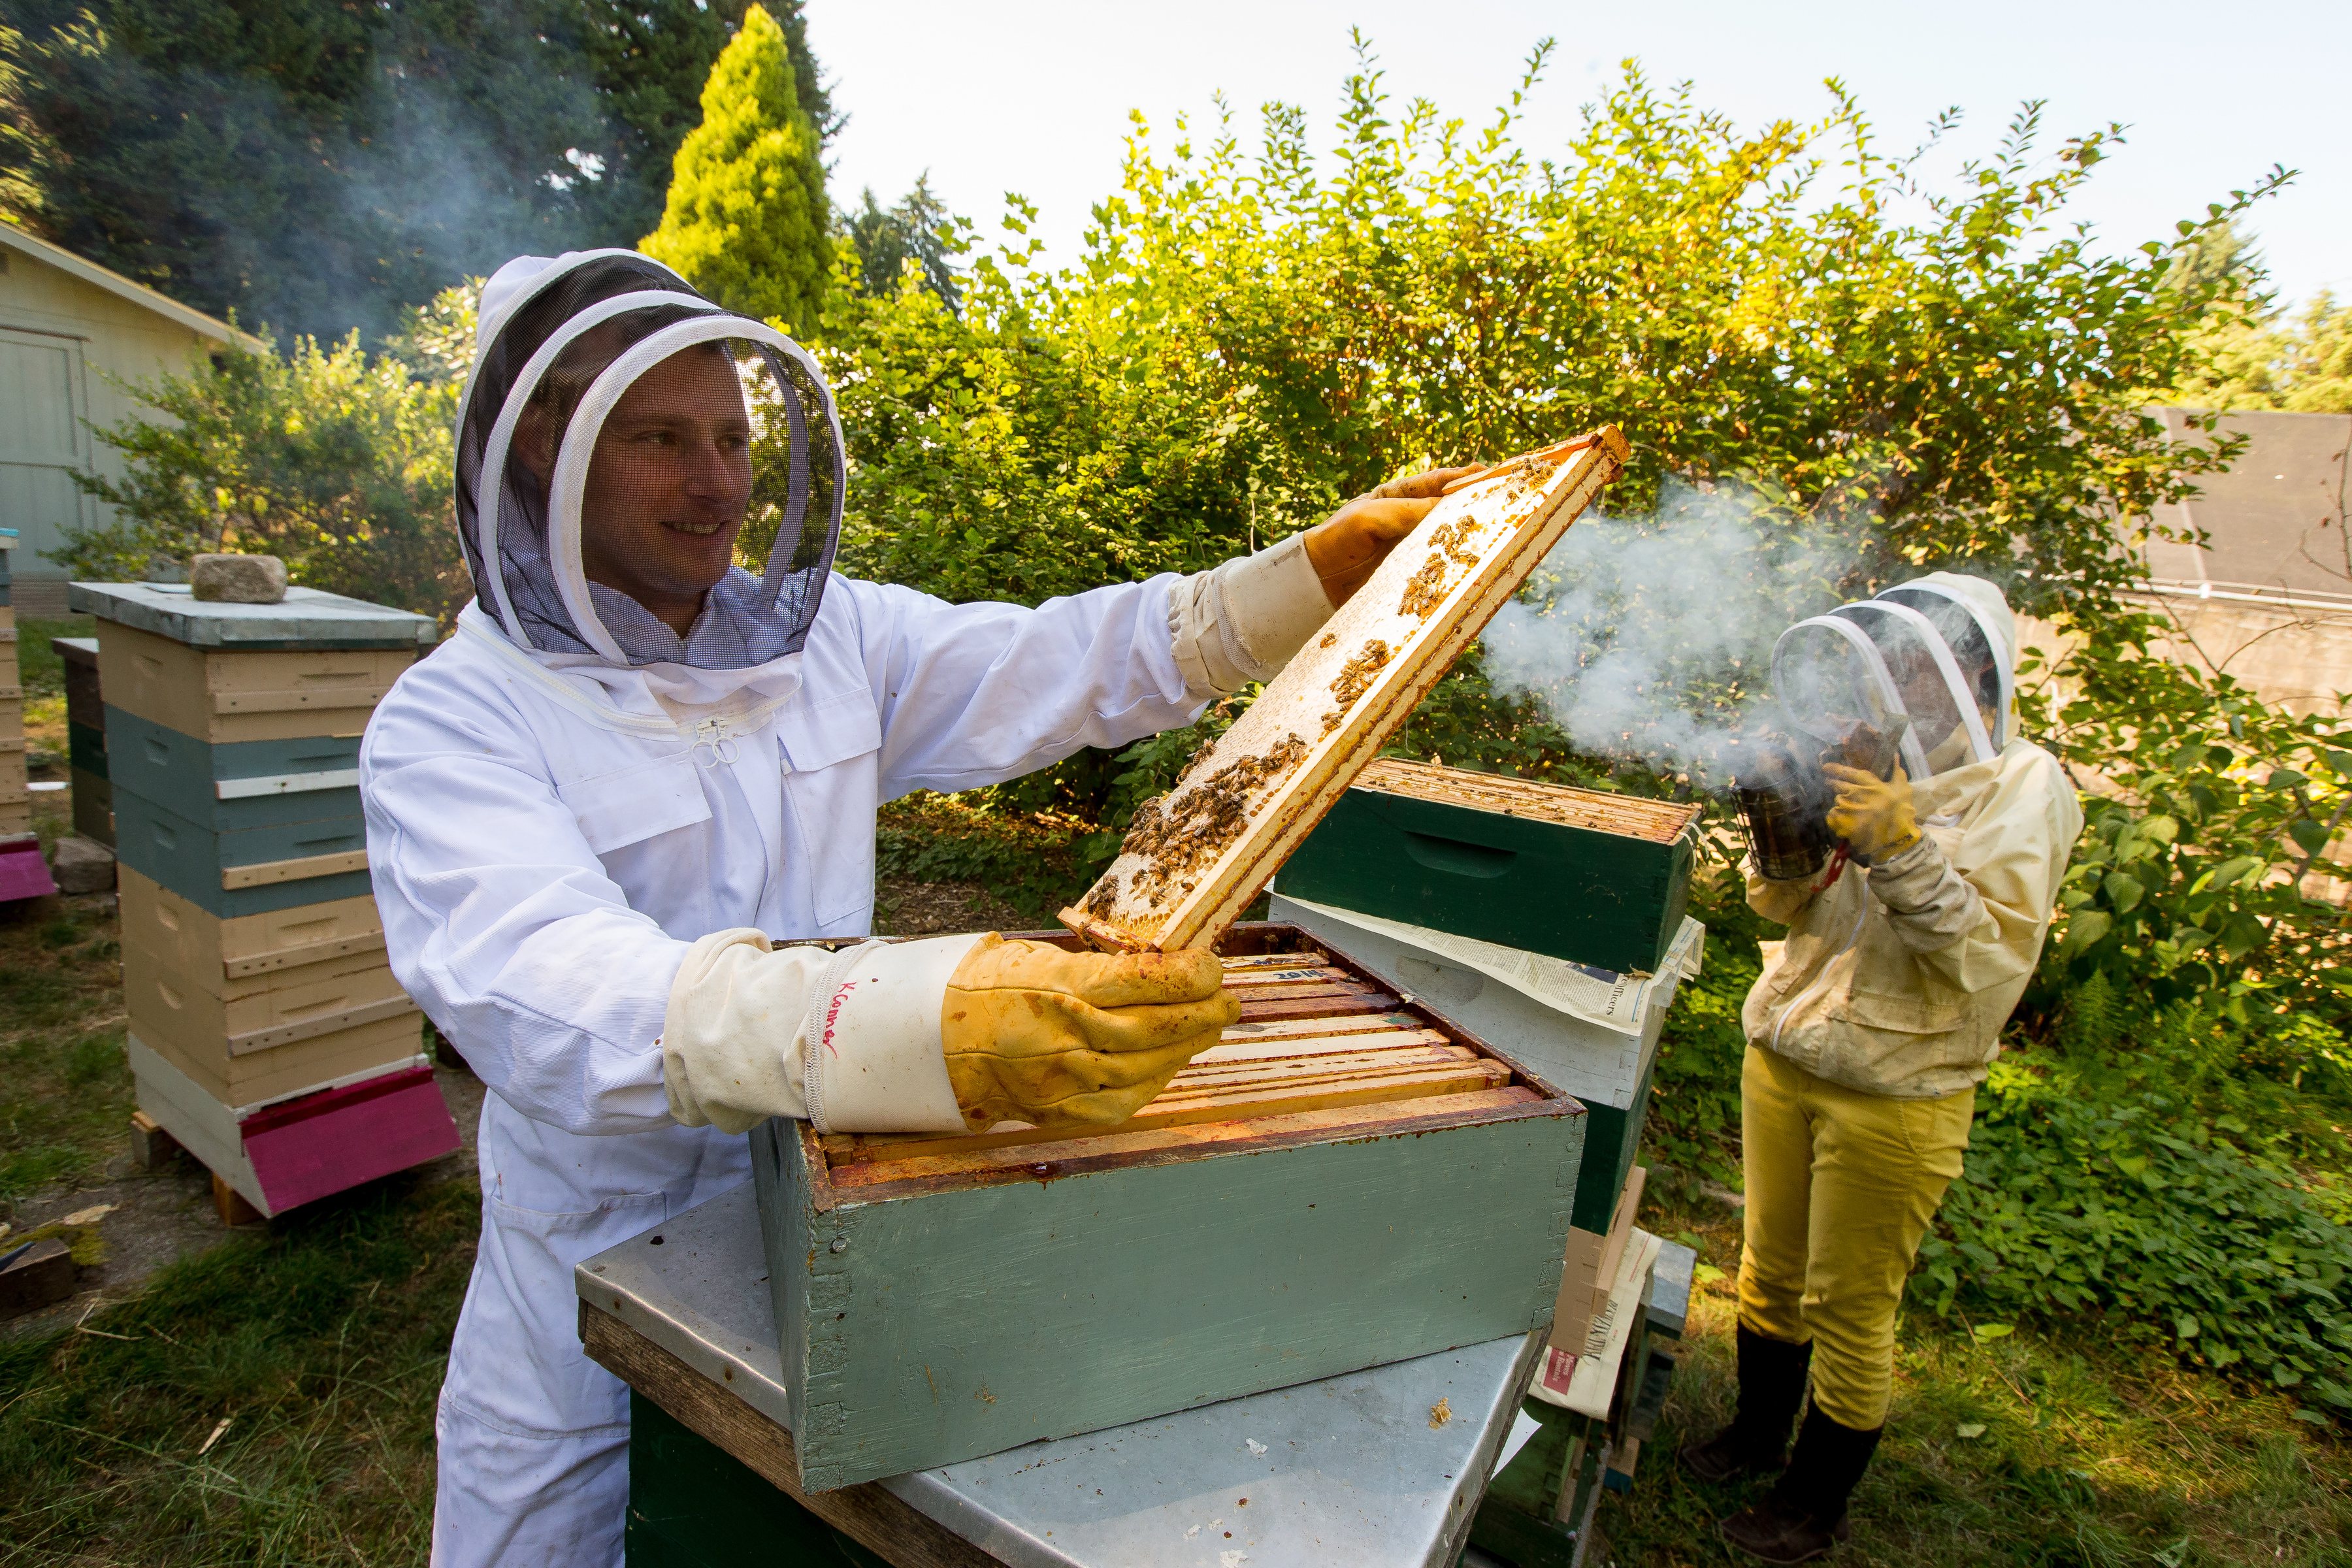 James O’Gorman inspects a frame of honeycomb at the Puget Sound Beekeeper Association’s apiary, located at the Washington Park Arboretum. (Photo credit: Scott Eklund/Red Box Pictures.)